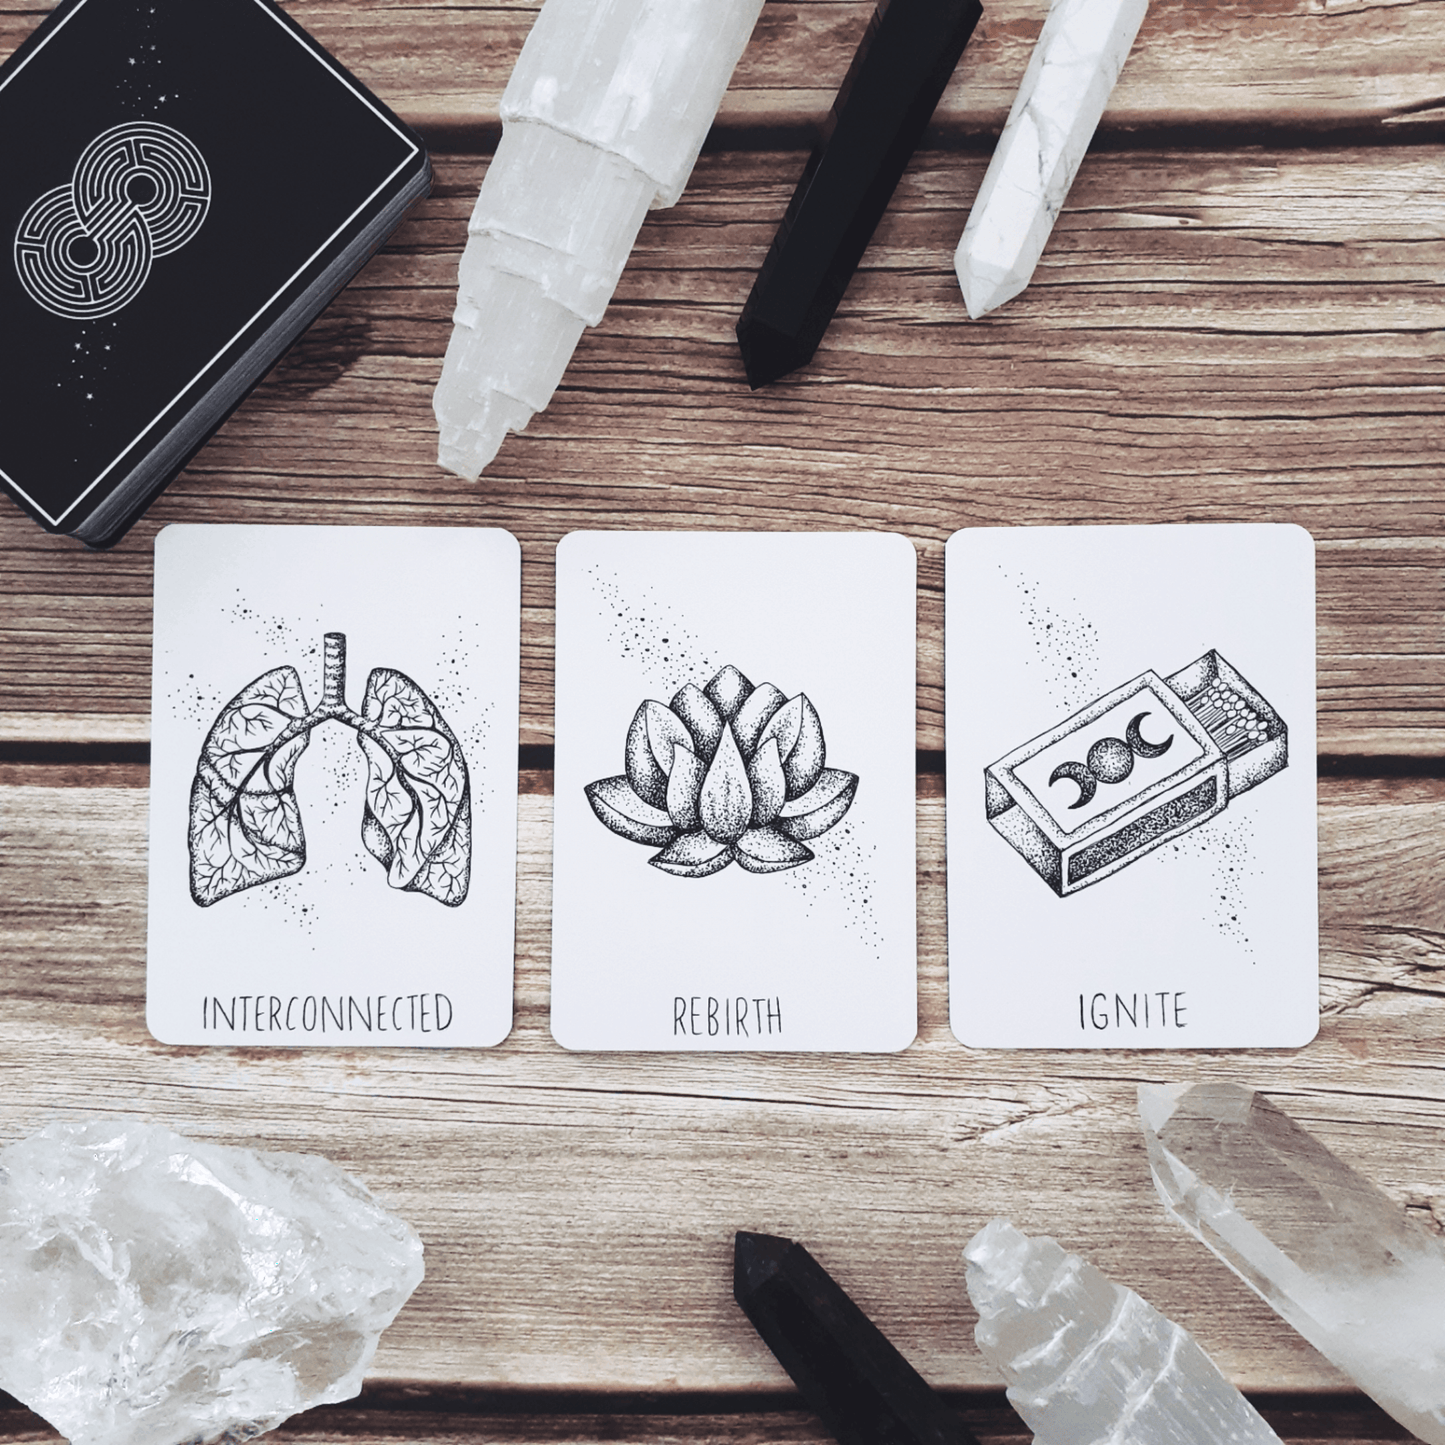 the wandering soul oracle with guidebook | indie oracle tarot card deck |oracle card reading | hand illustrated oracle cards - The Wandering Moon Co.